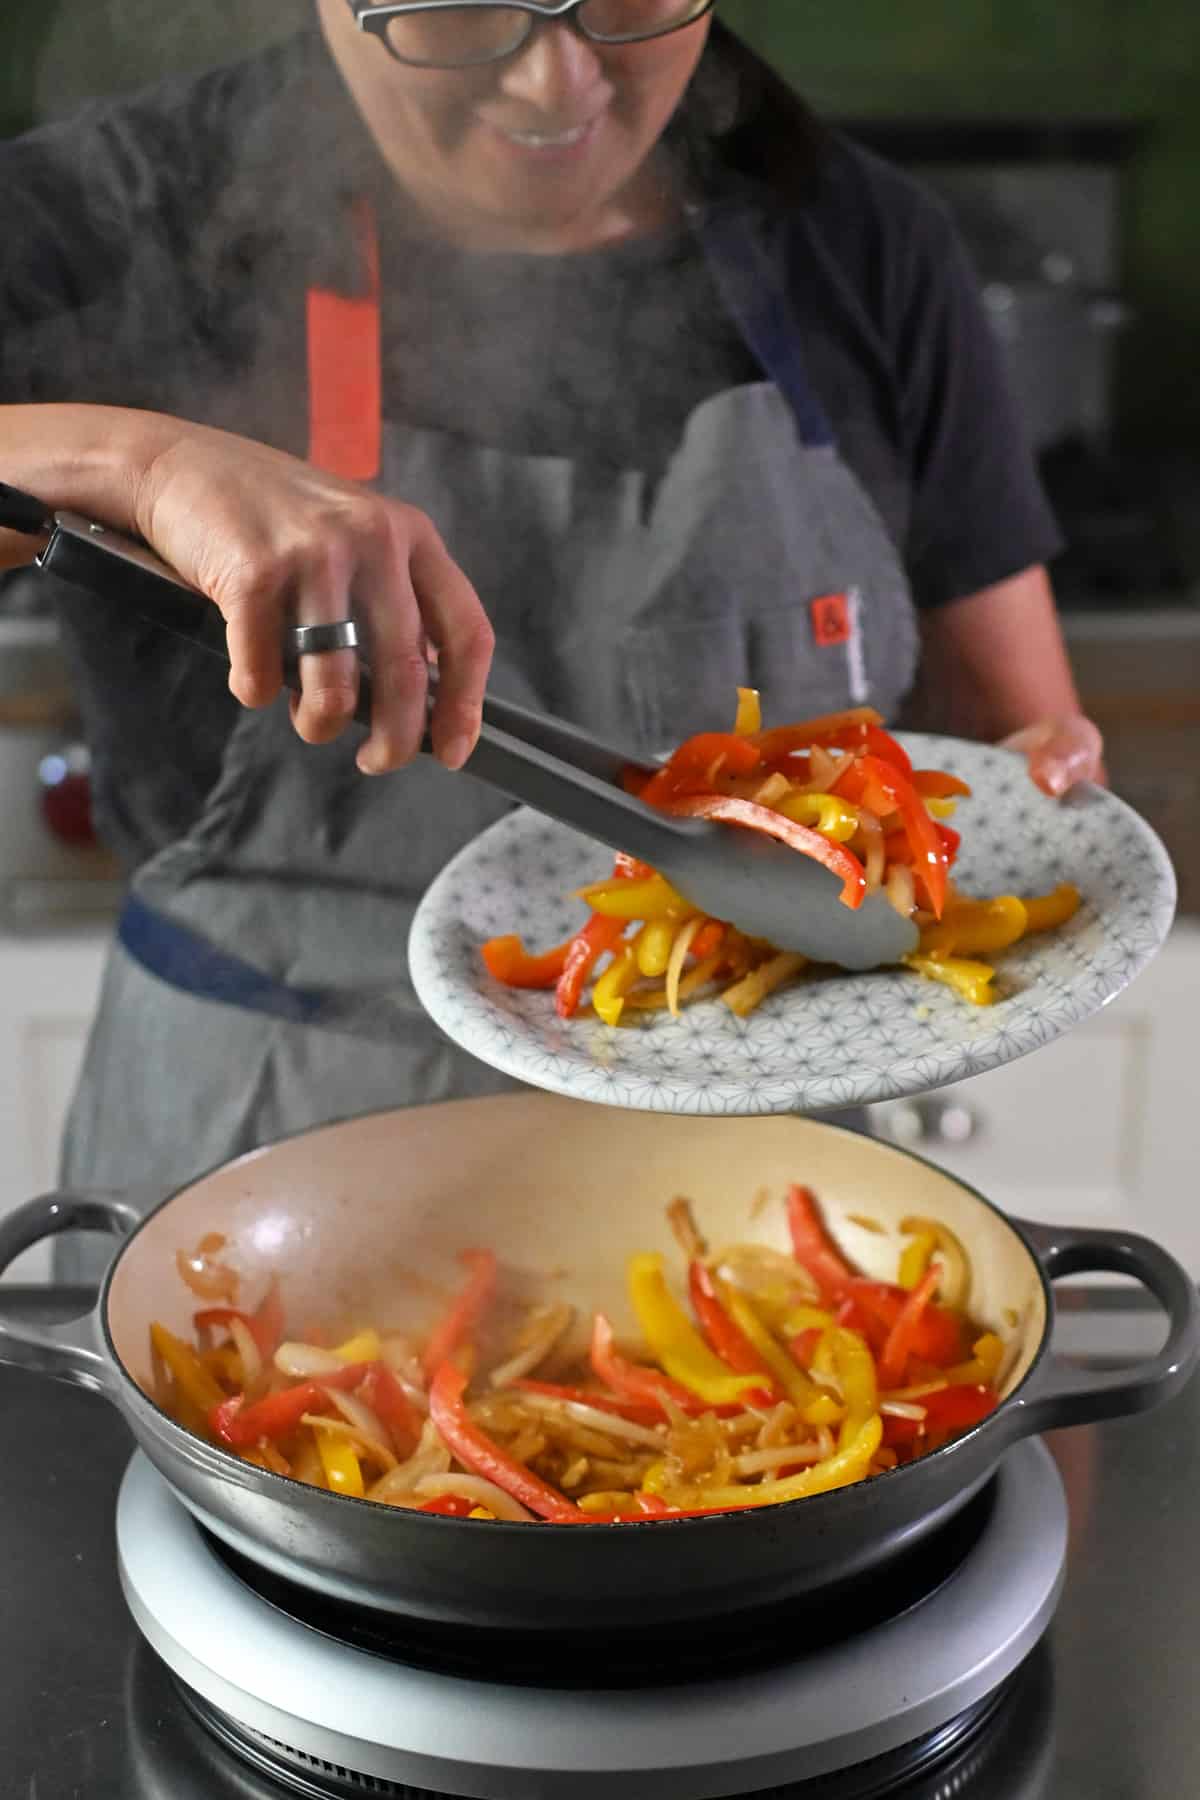 A smiling Asian woman with glasses is transferring cooked fajita vegetables from a cast iron pan to a platter with a pair of tongs.